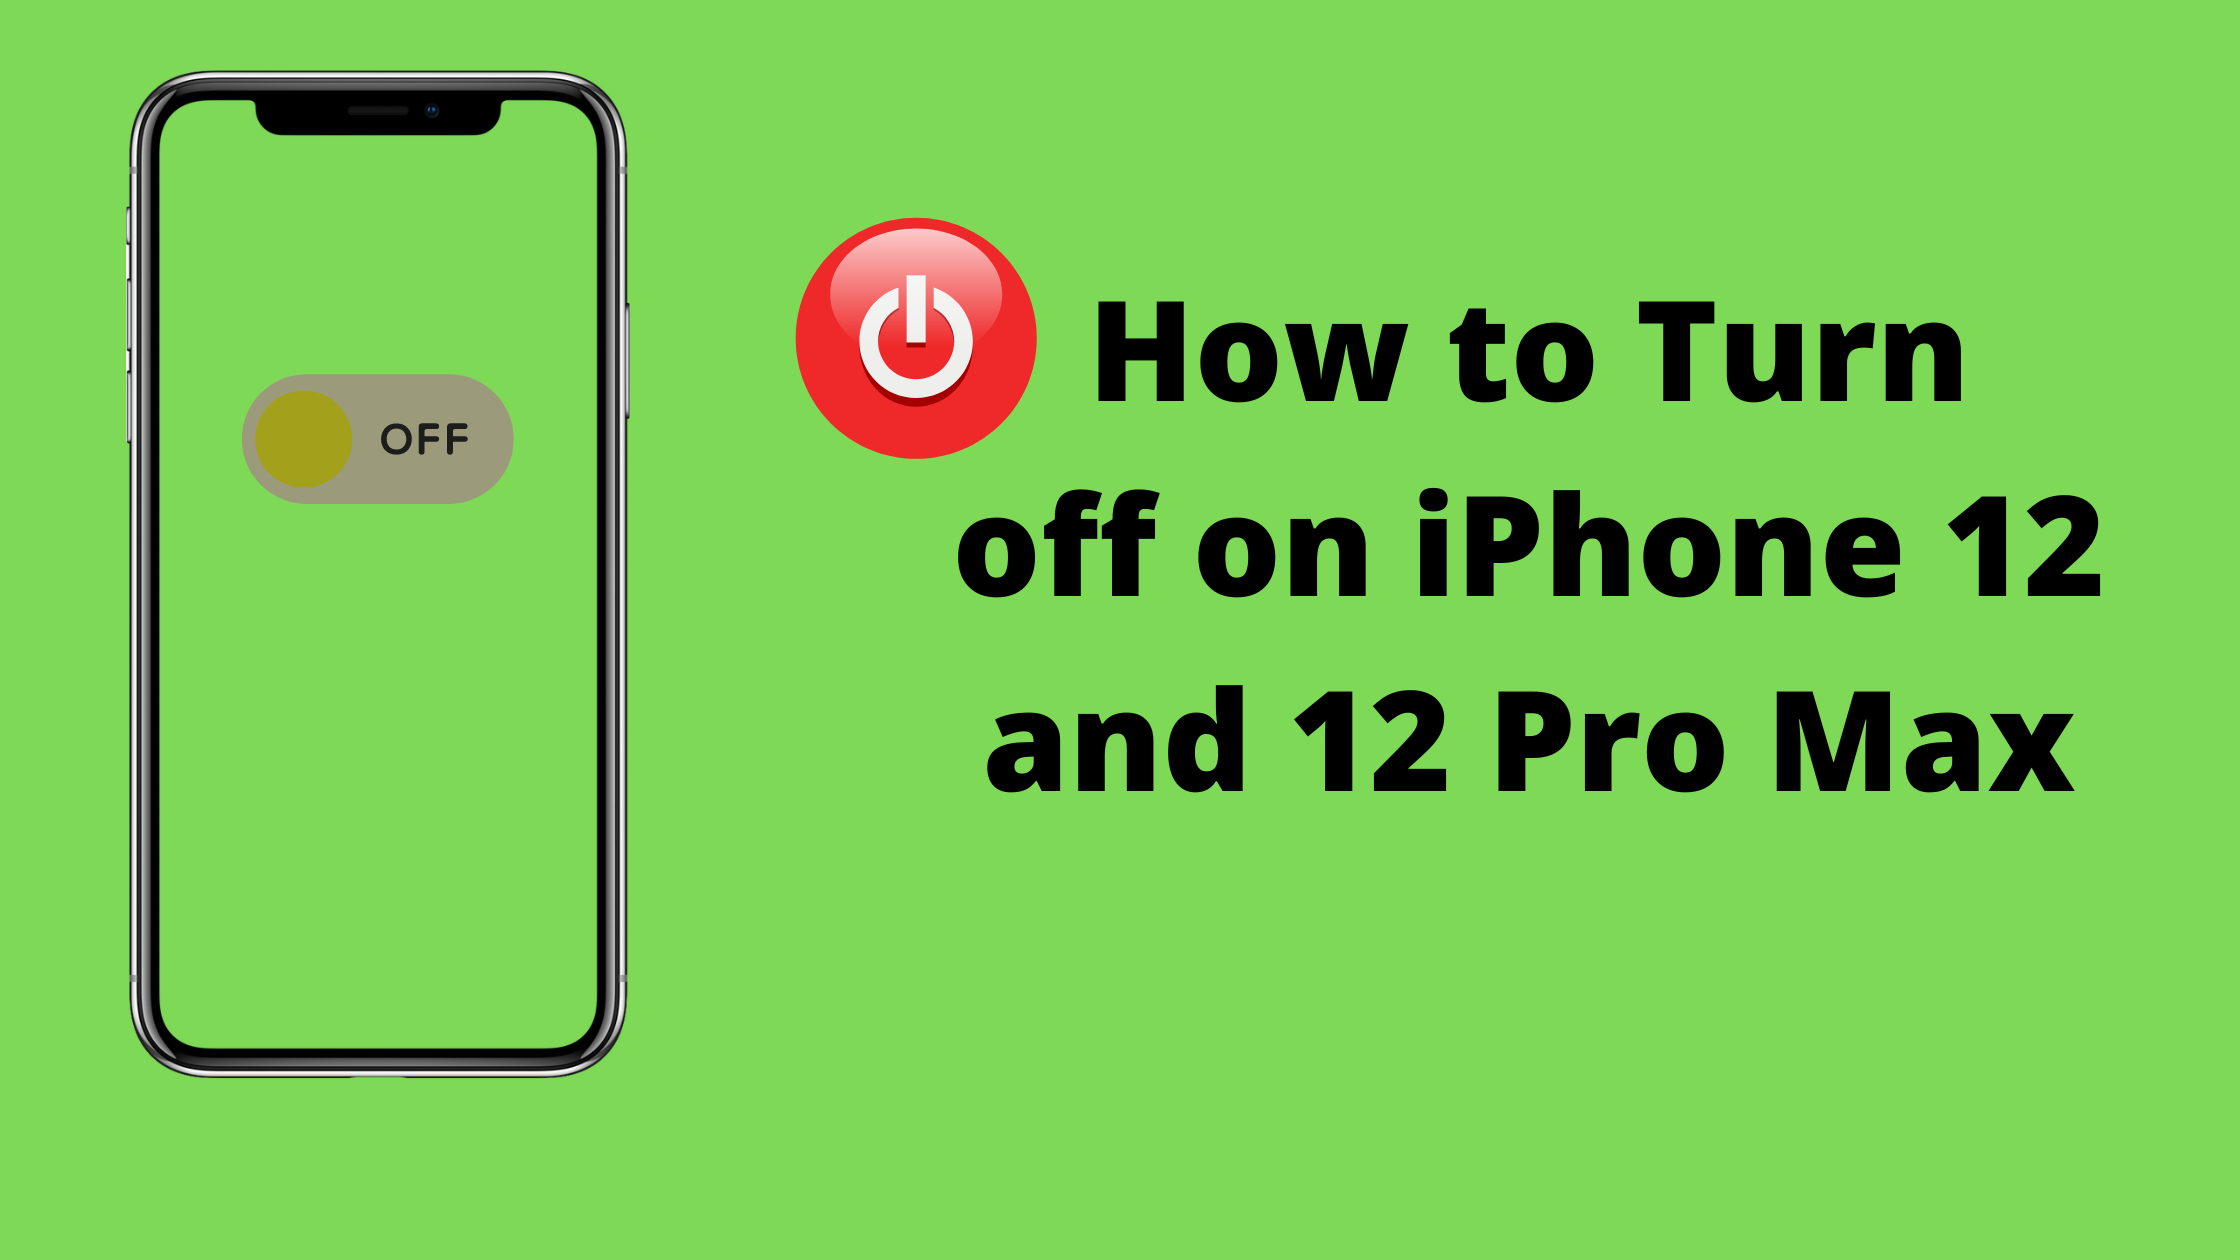 How to Turn off on iPhone 12 and 12 Pro Max